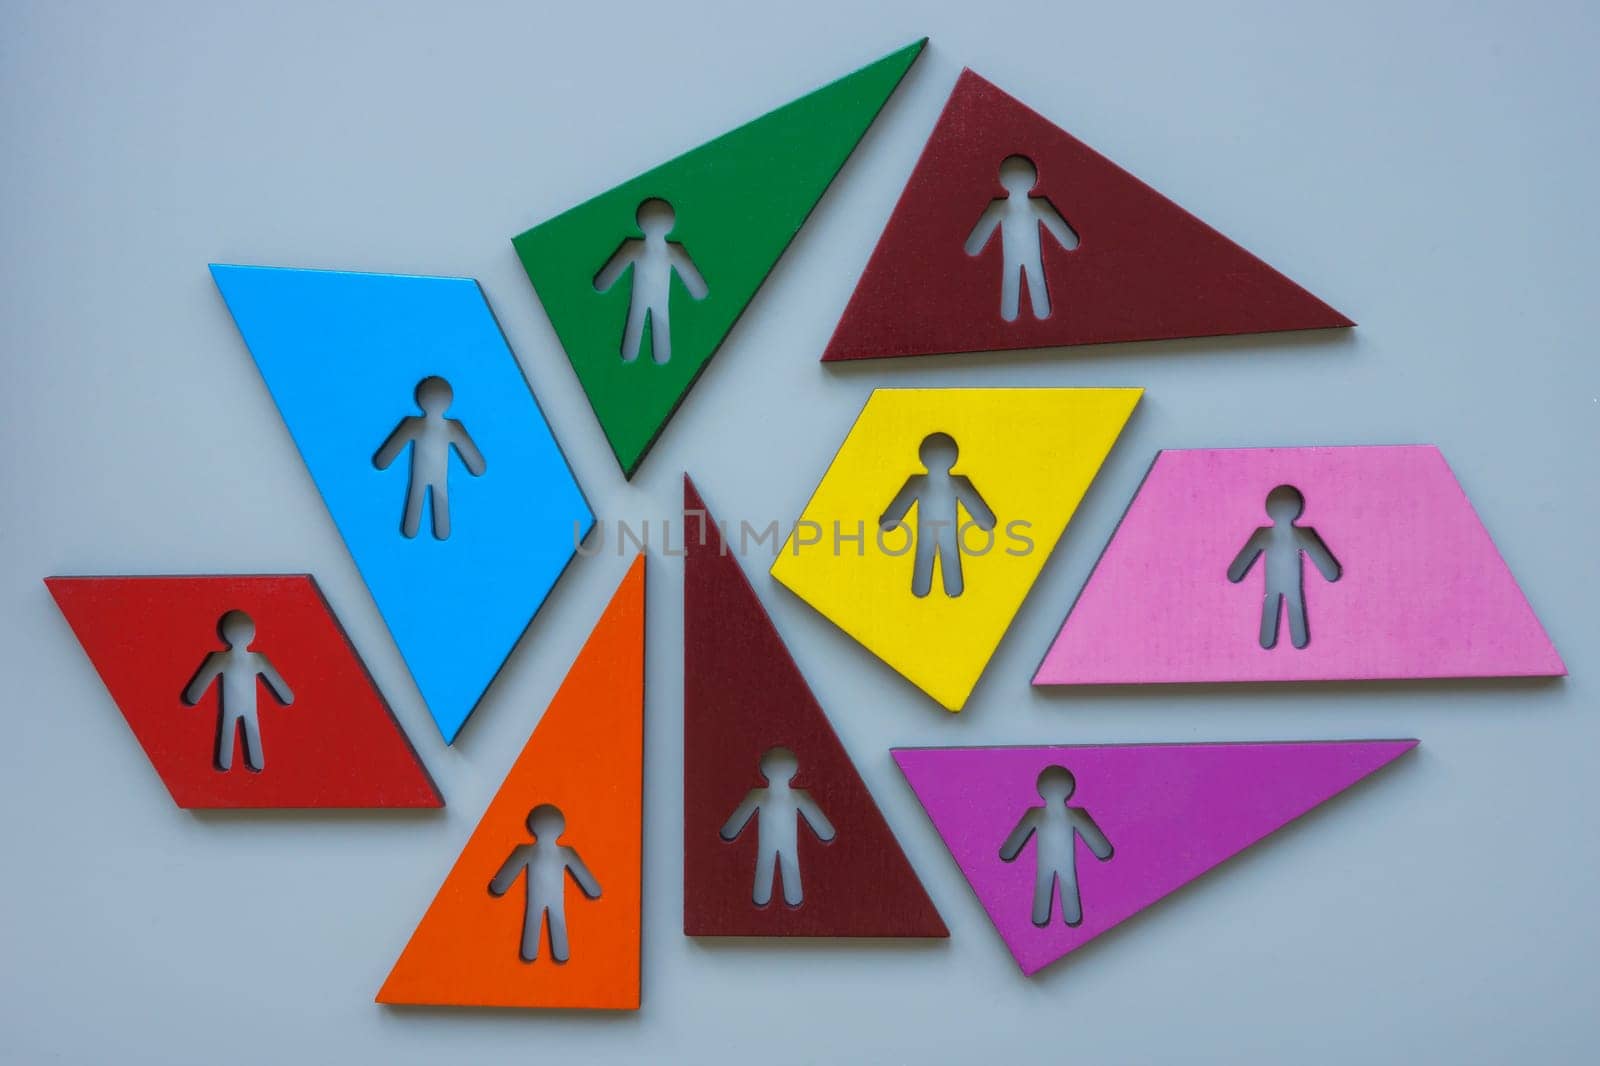 Diversity and inclusion abstract. Multicolored figures with outlines of people.